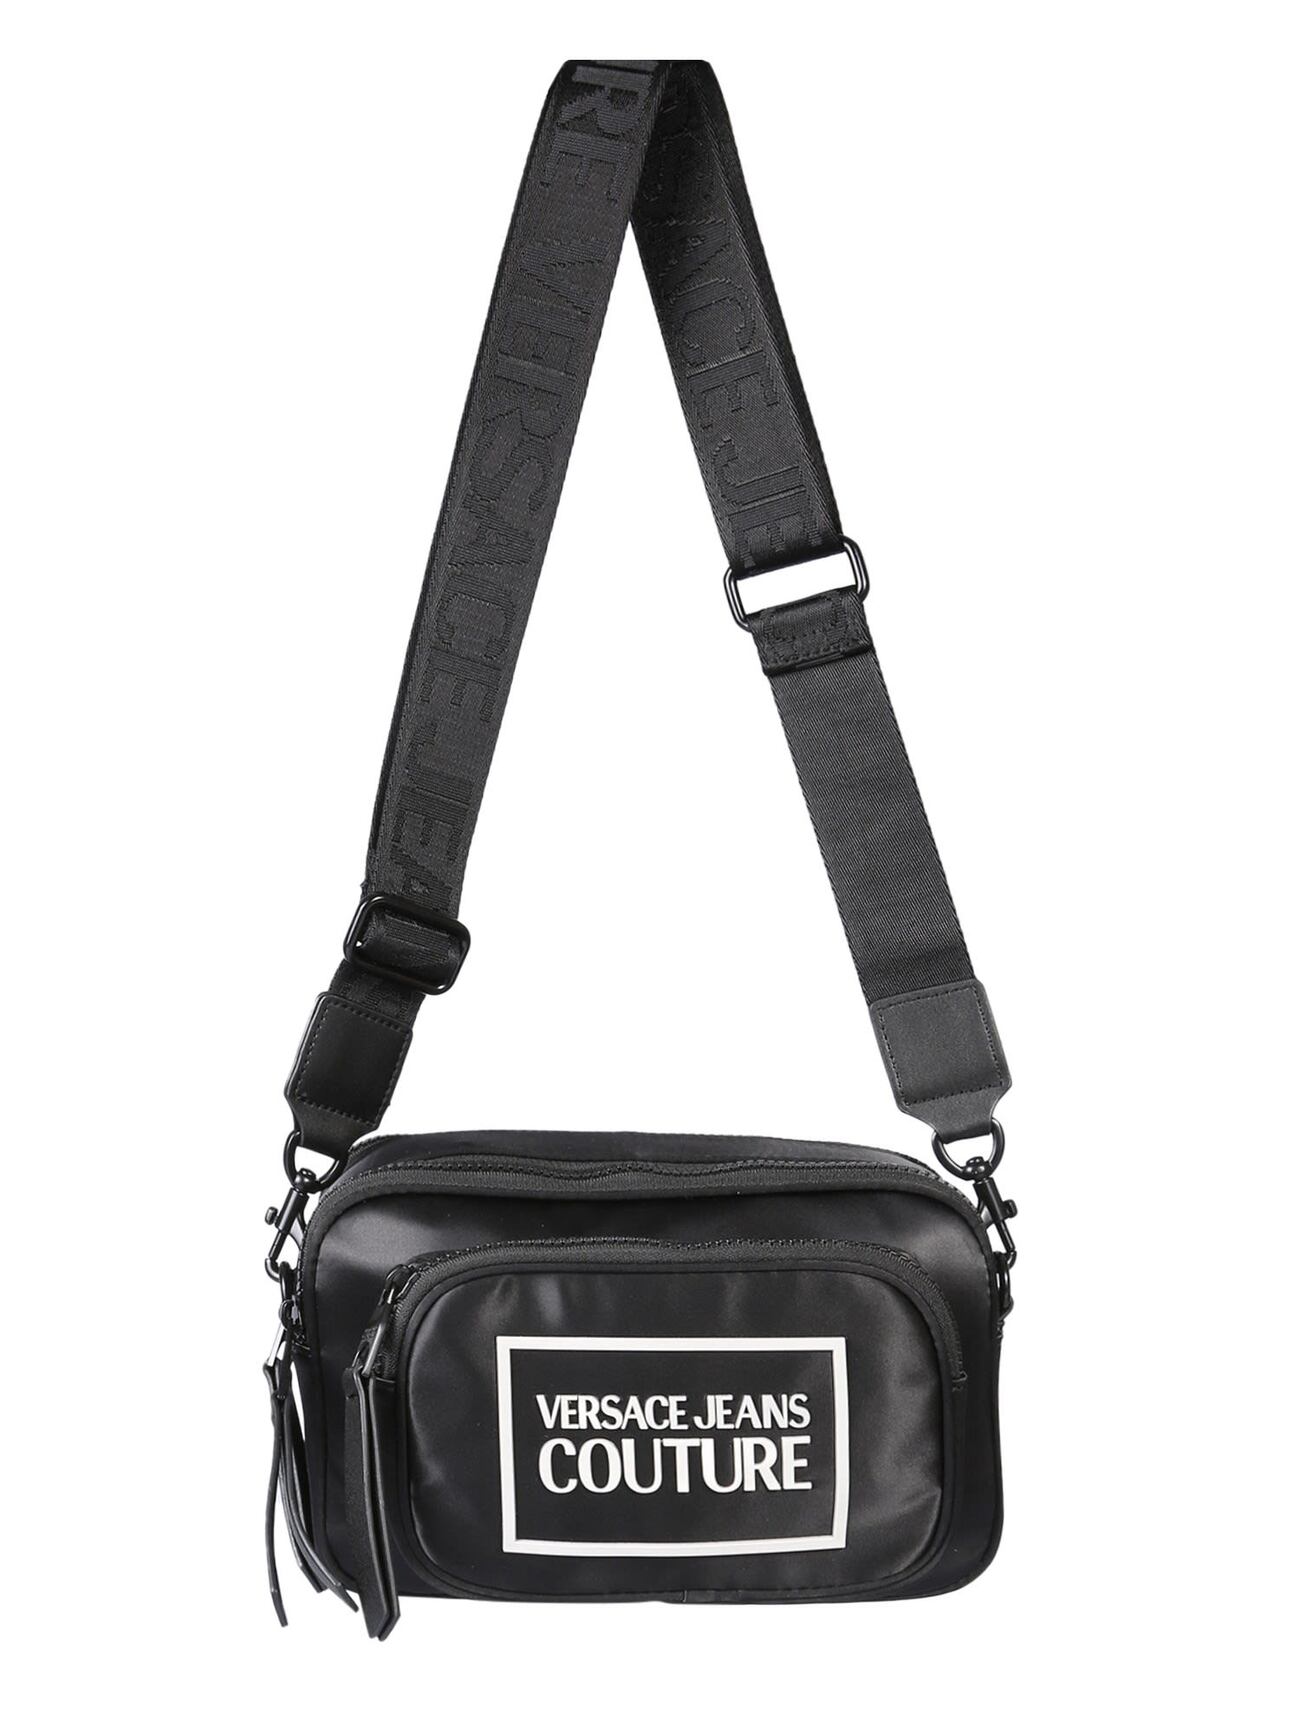 Versace Jeans Couture Logo Bag in nero